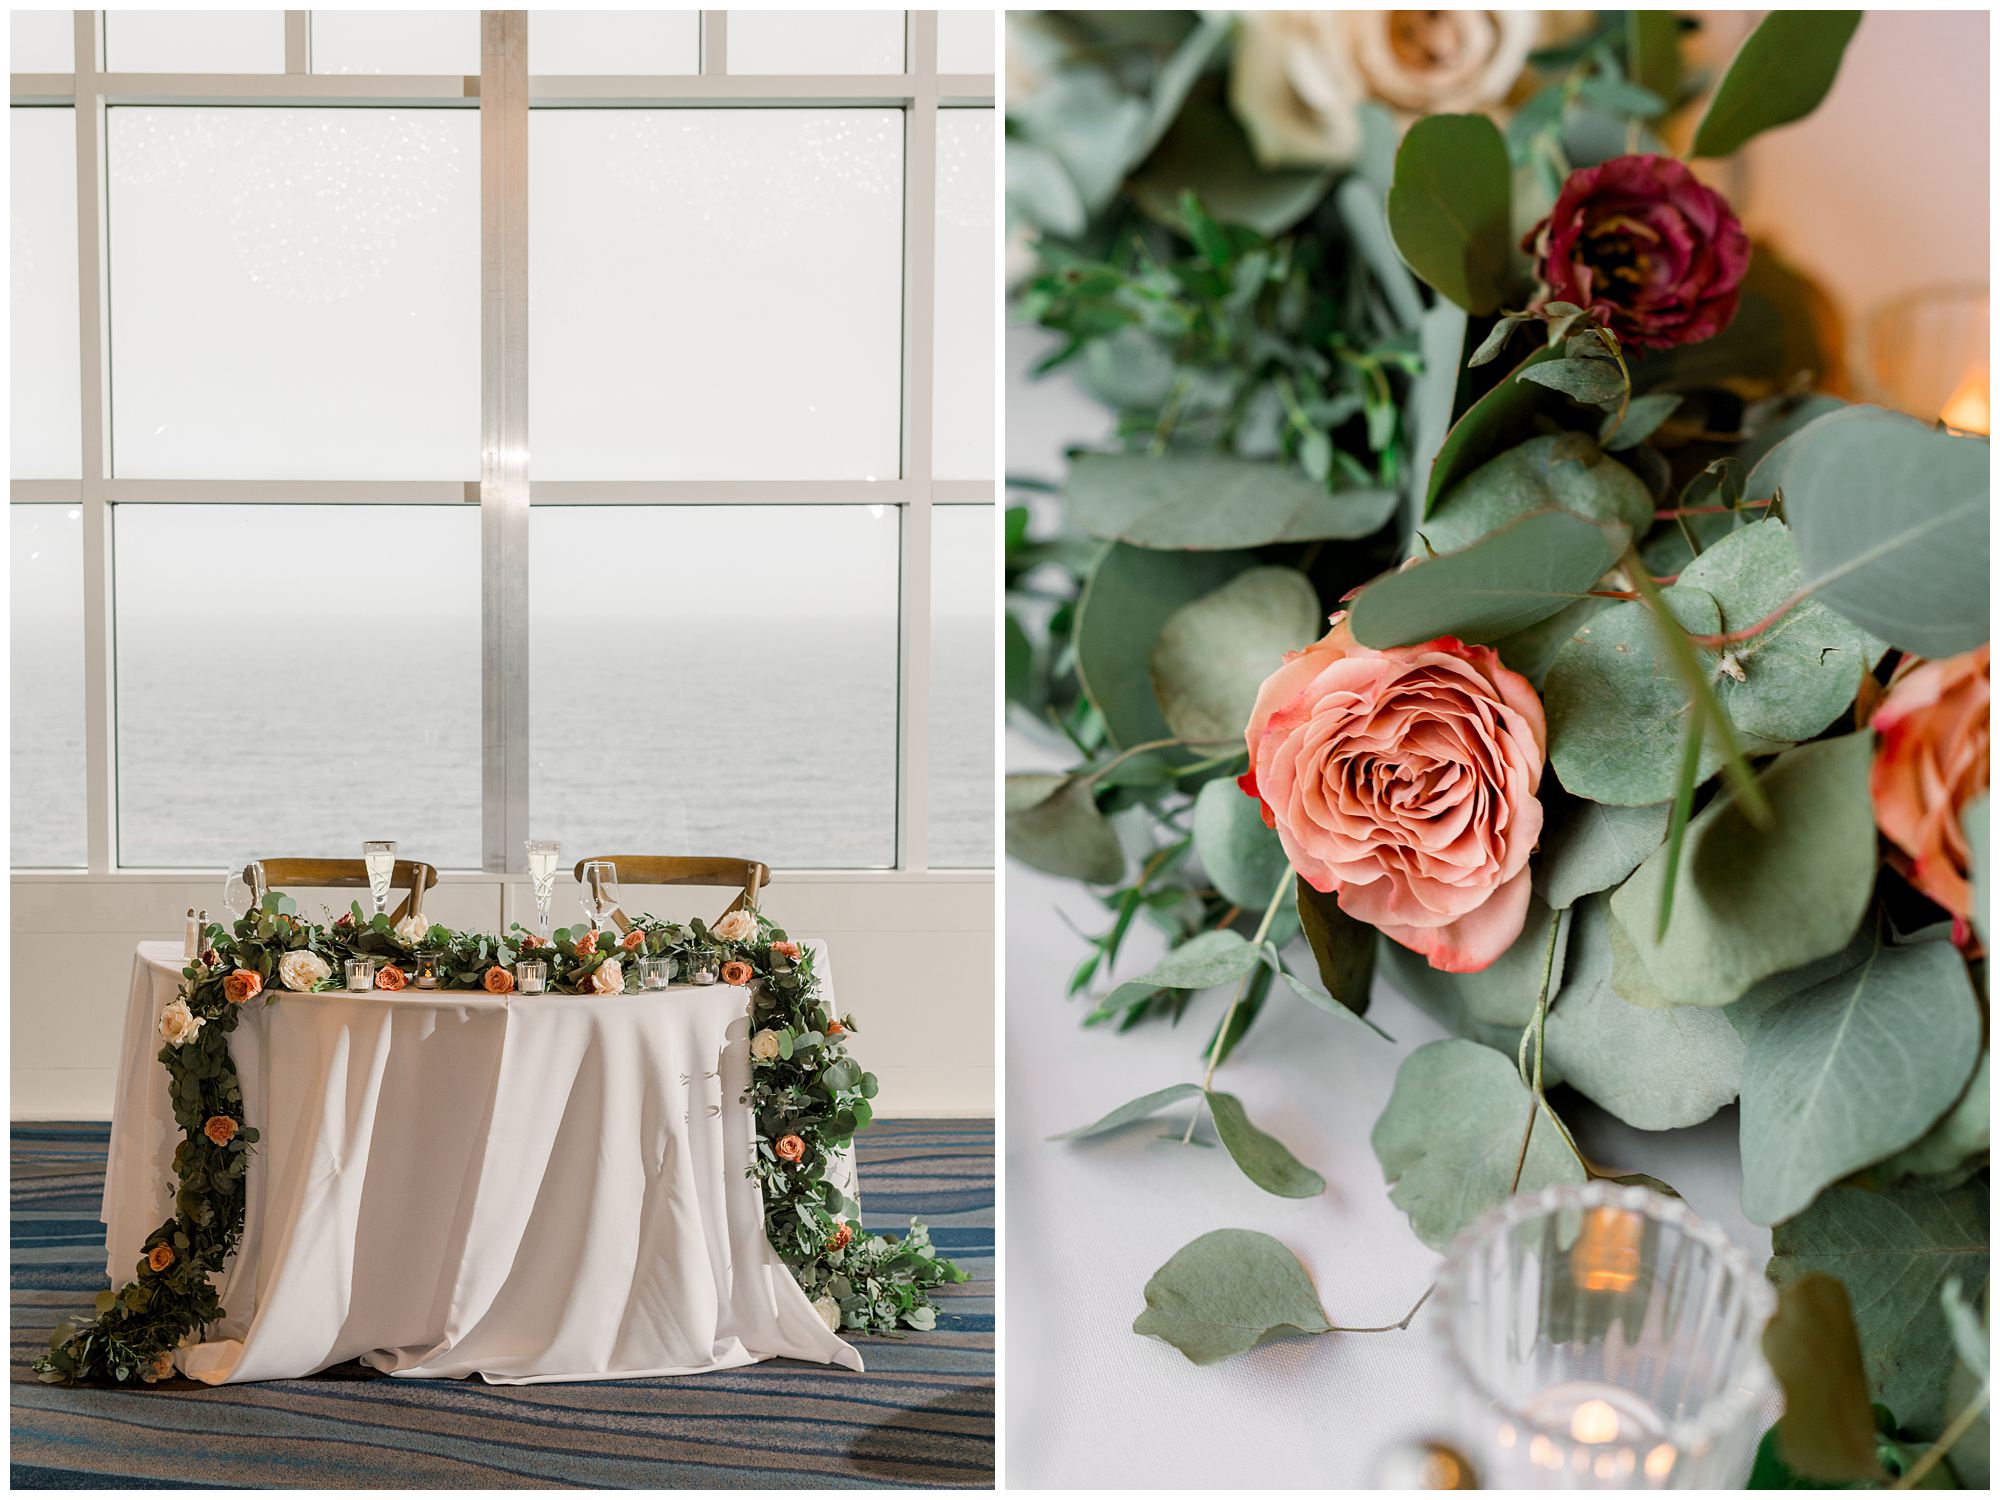 Cliff House Wedding reception florals and details.